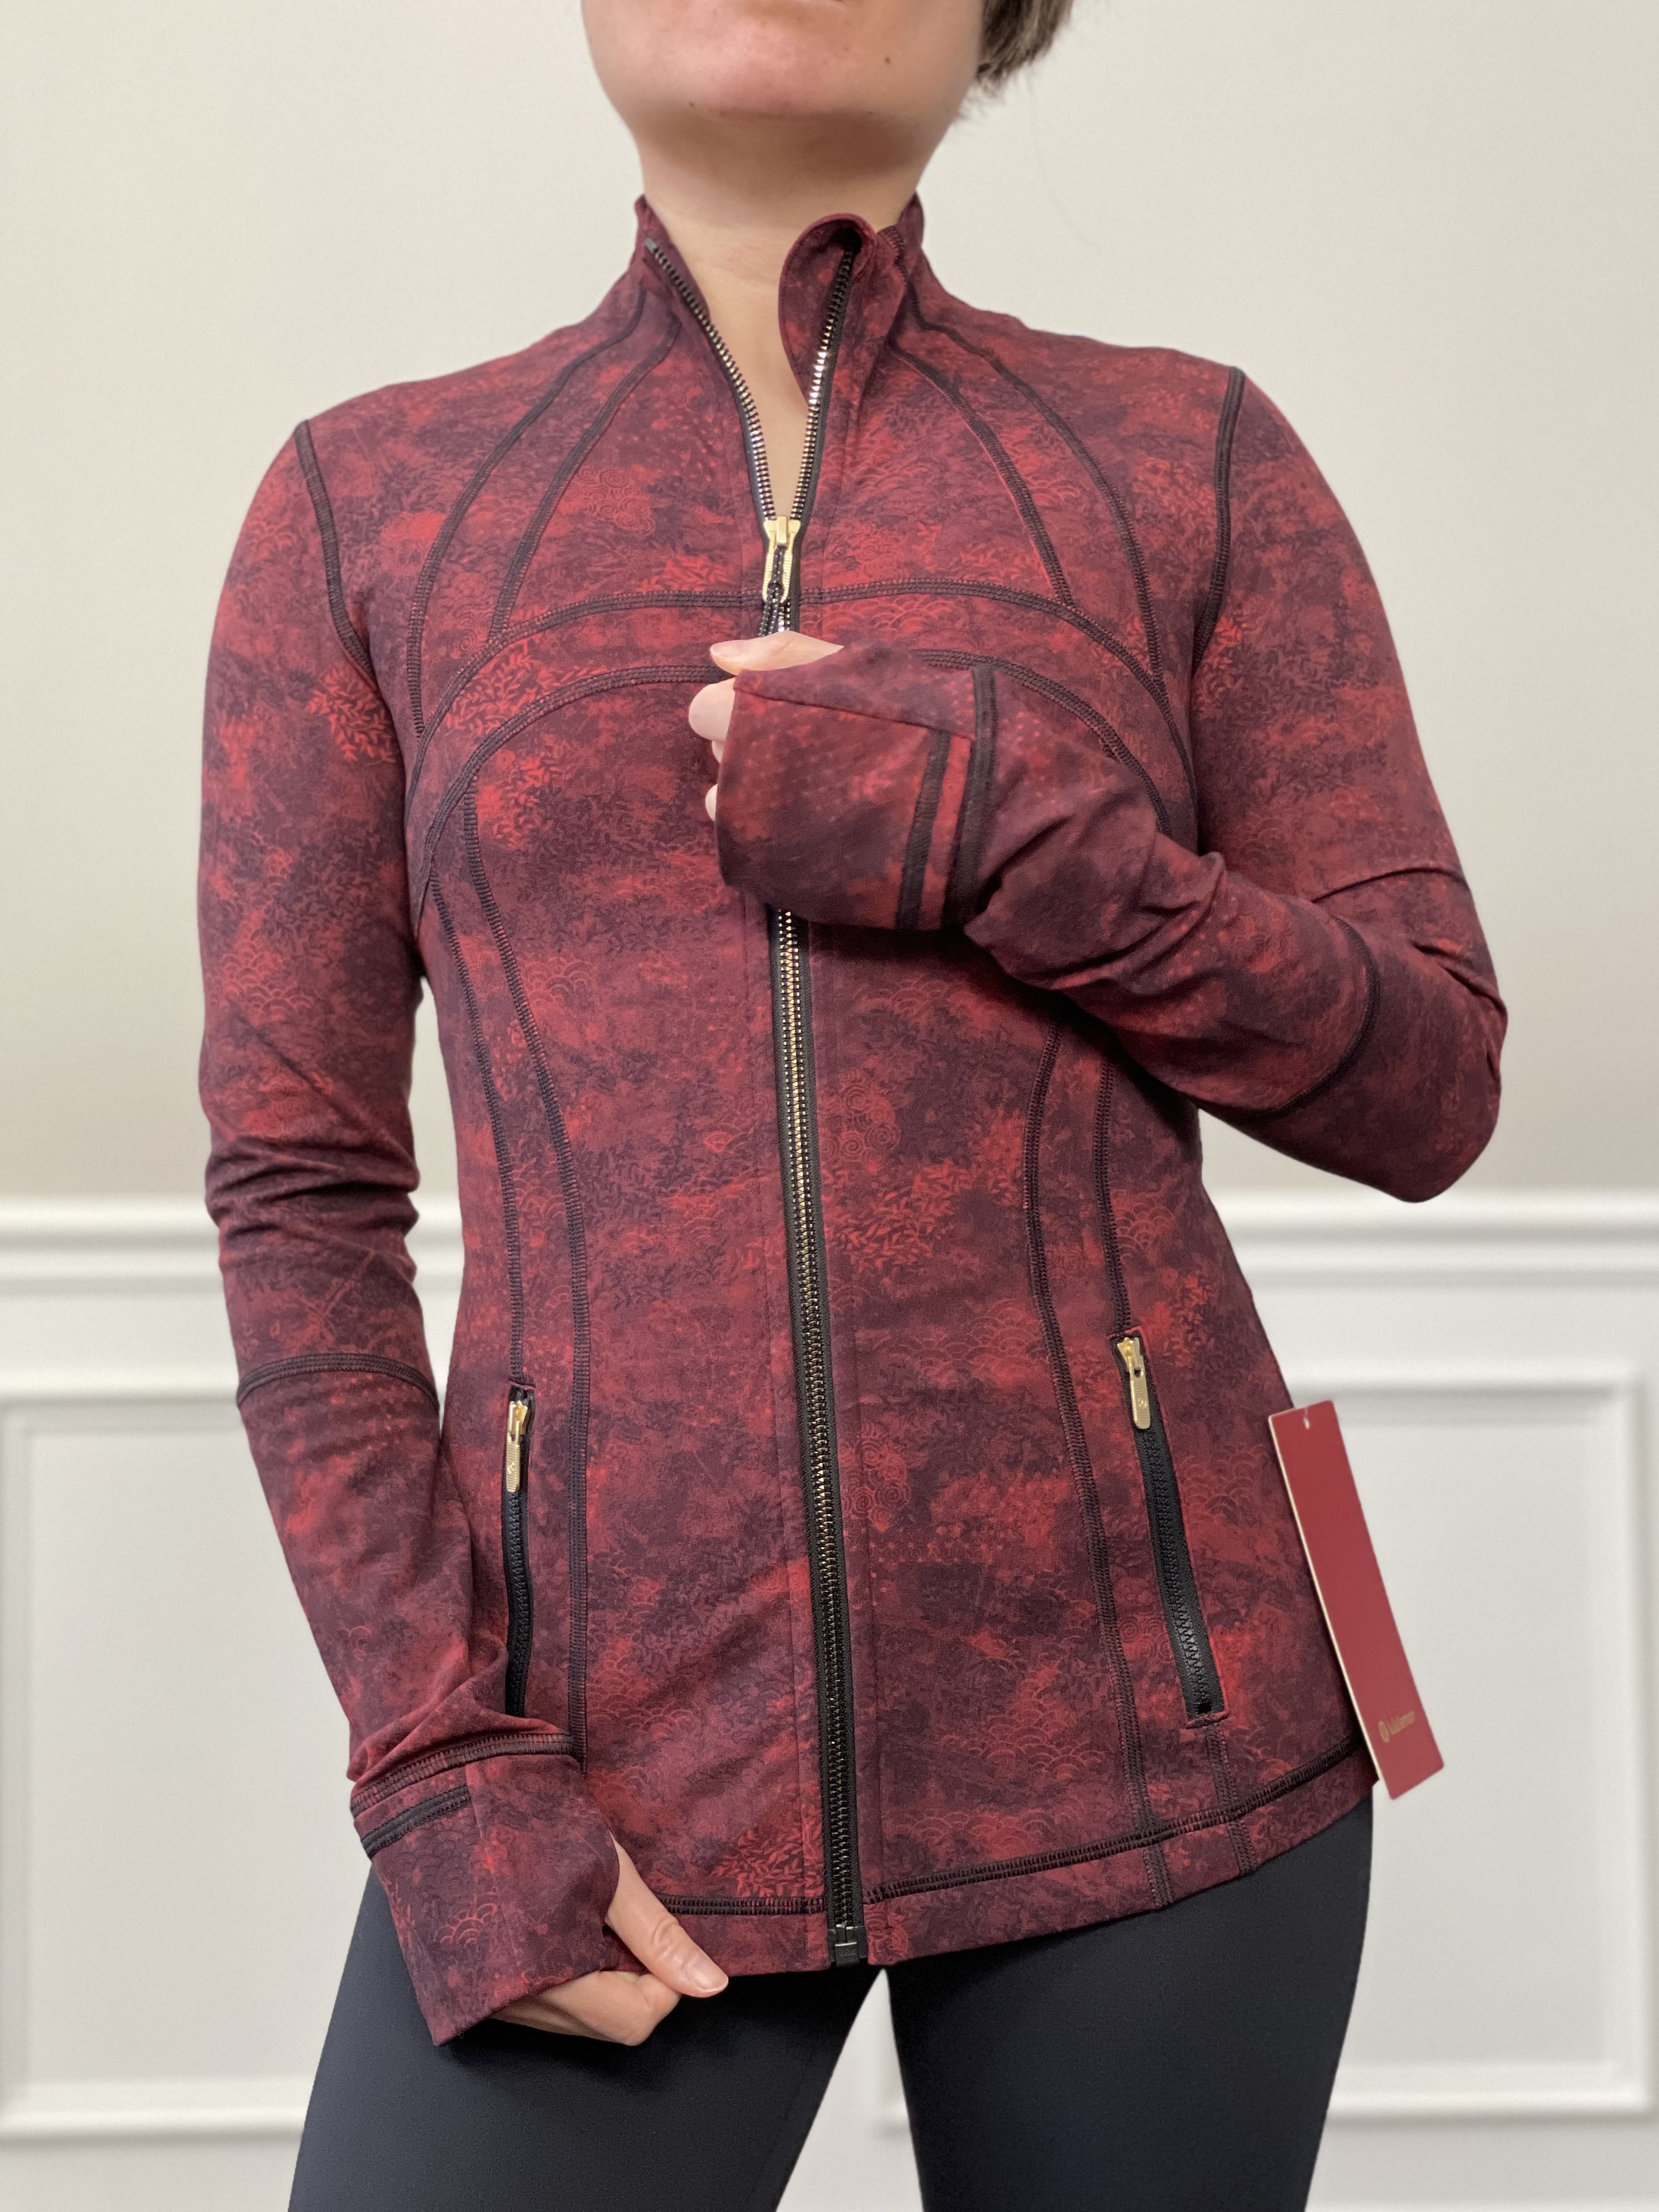 Fit Review Friday! Lunar New Year Define Jacket and Everywhere